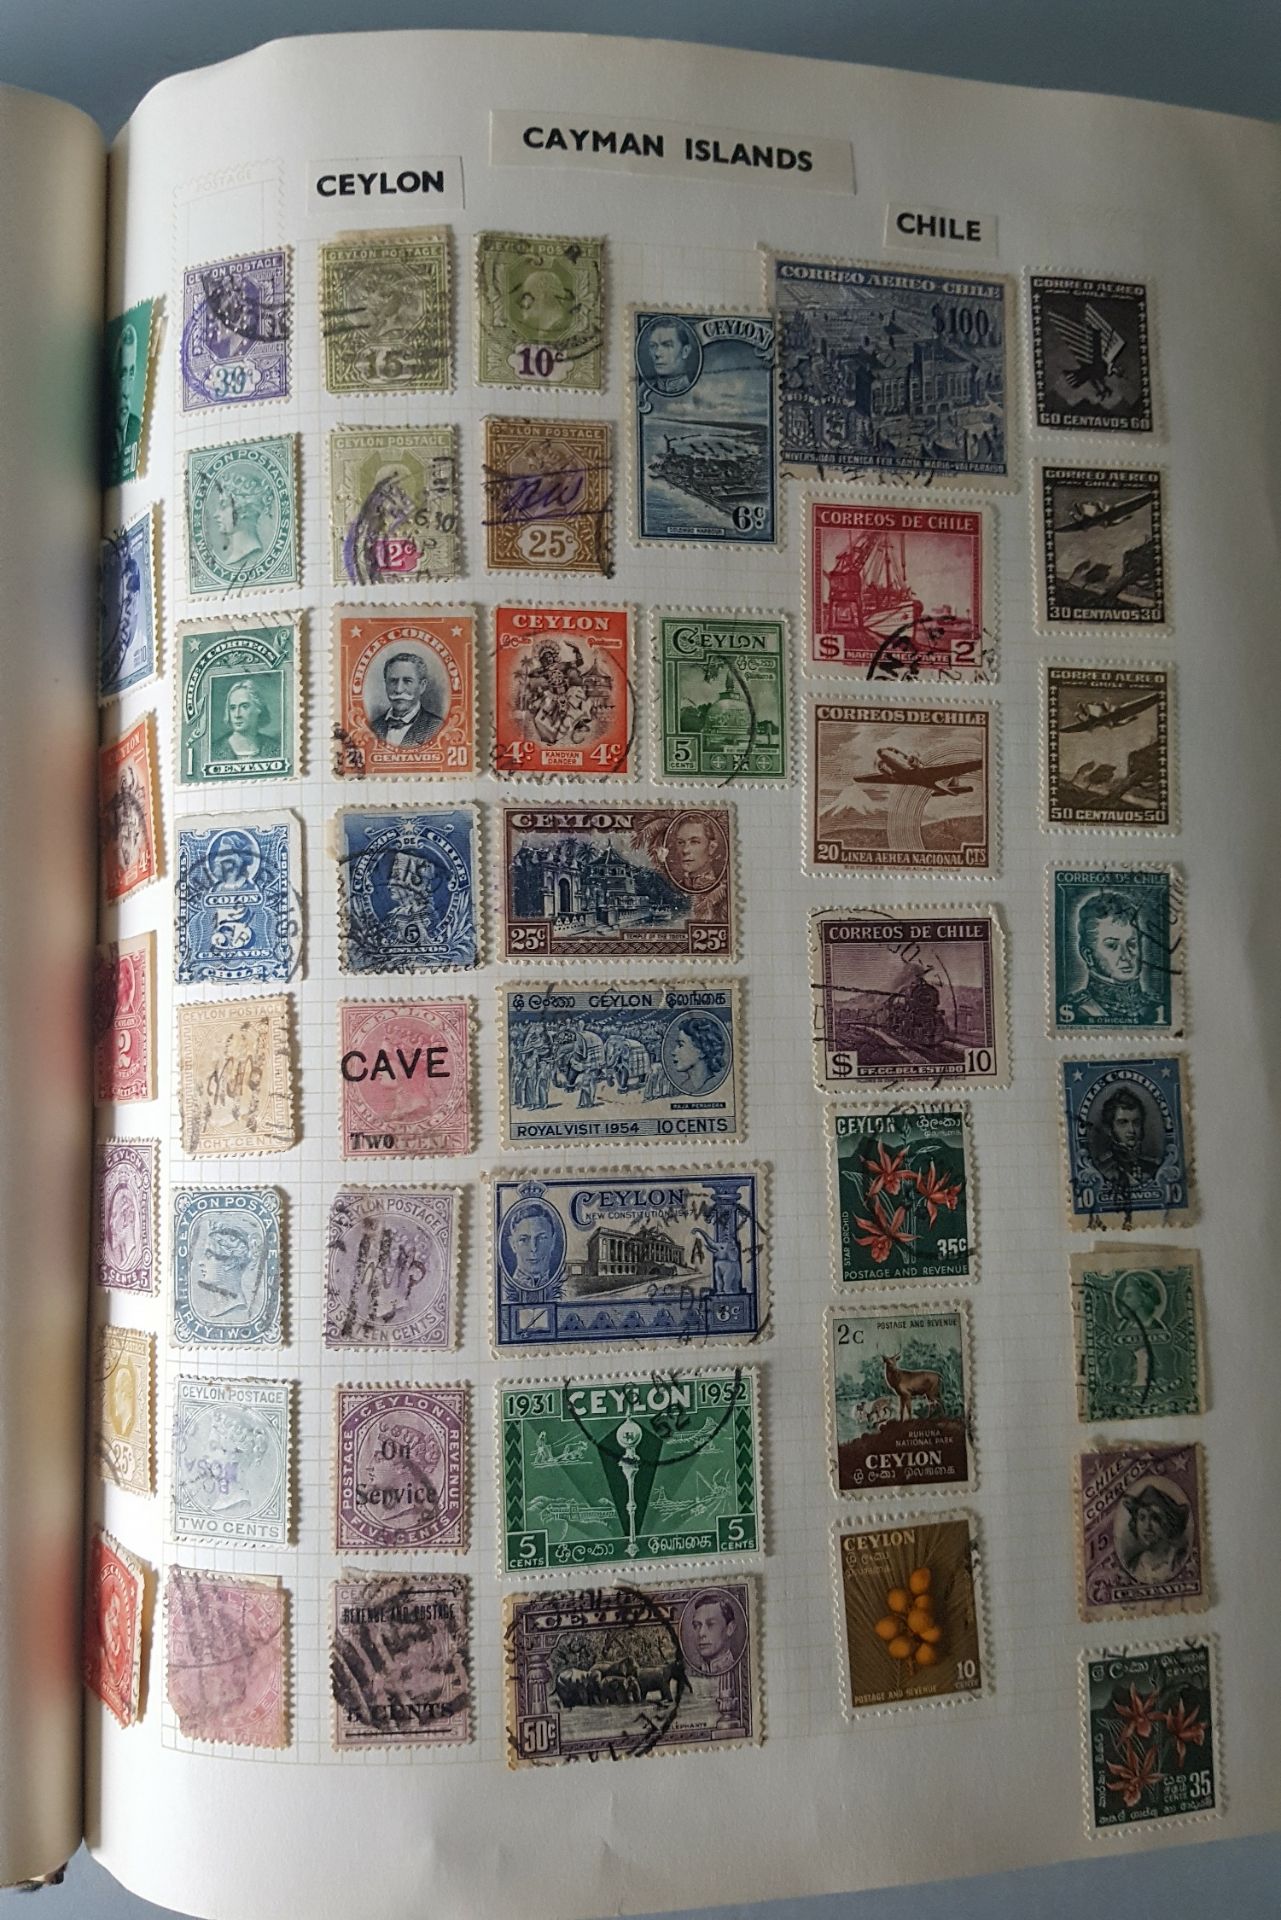 Vintage Retro Concord Stamp Album British, Commonwealth & World Stamps Over 500 Stamps - Image 4 of 11